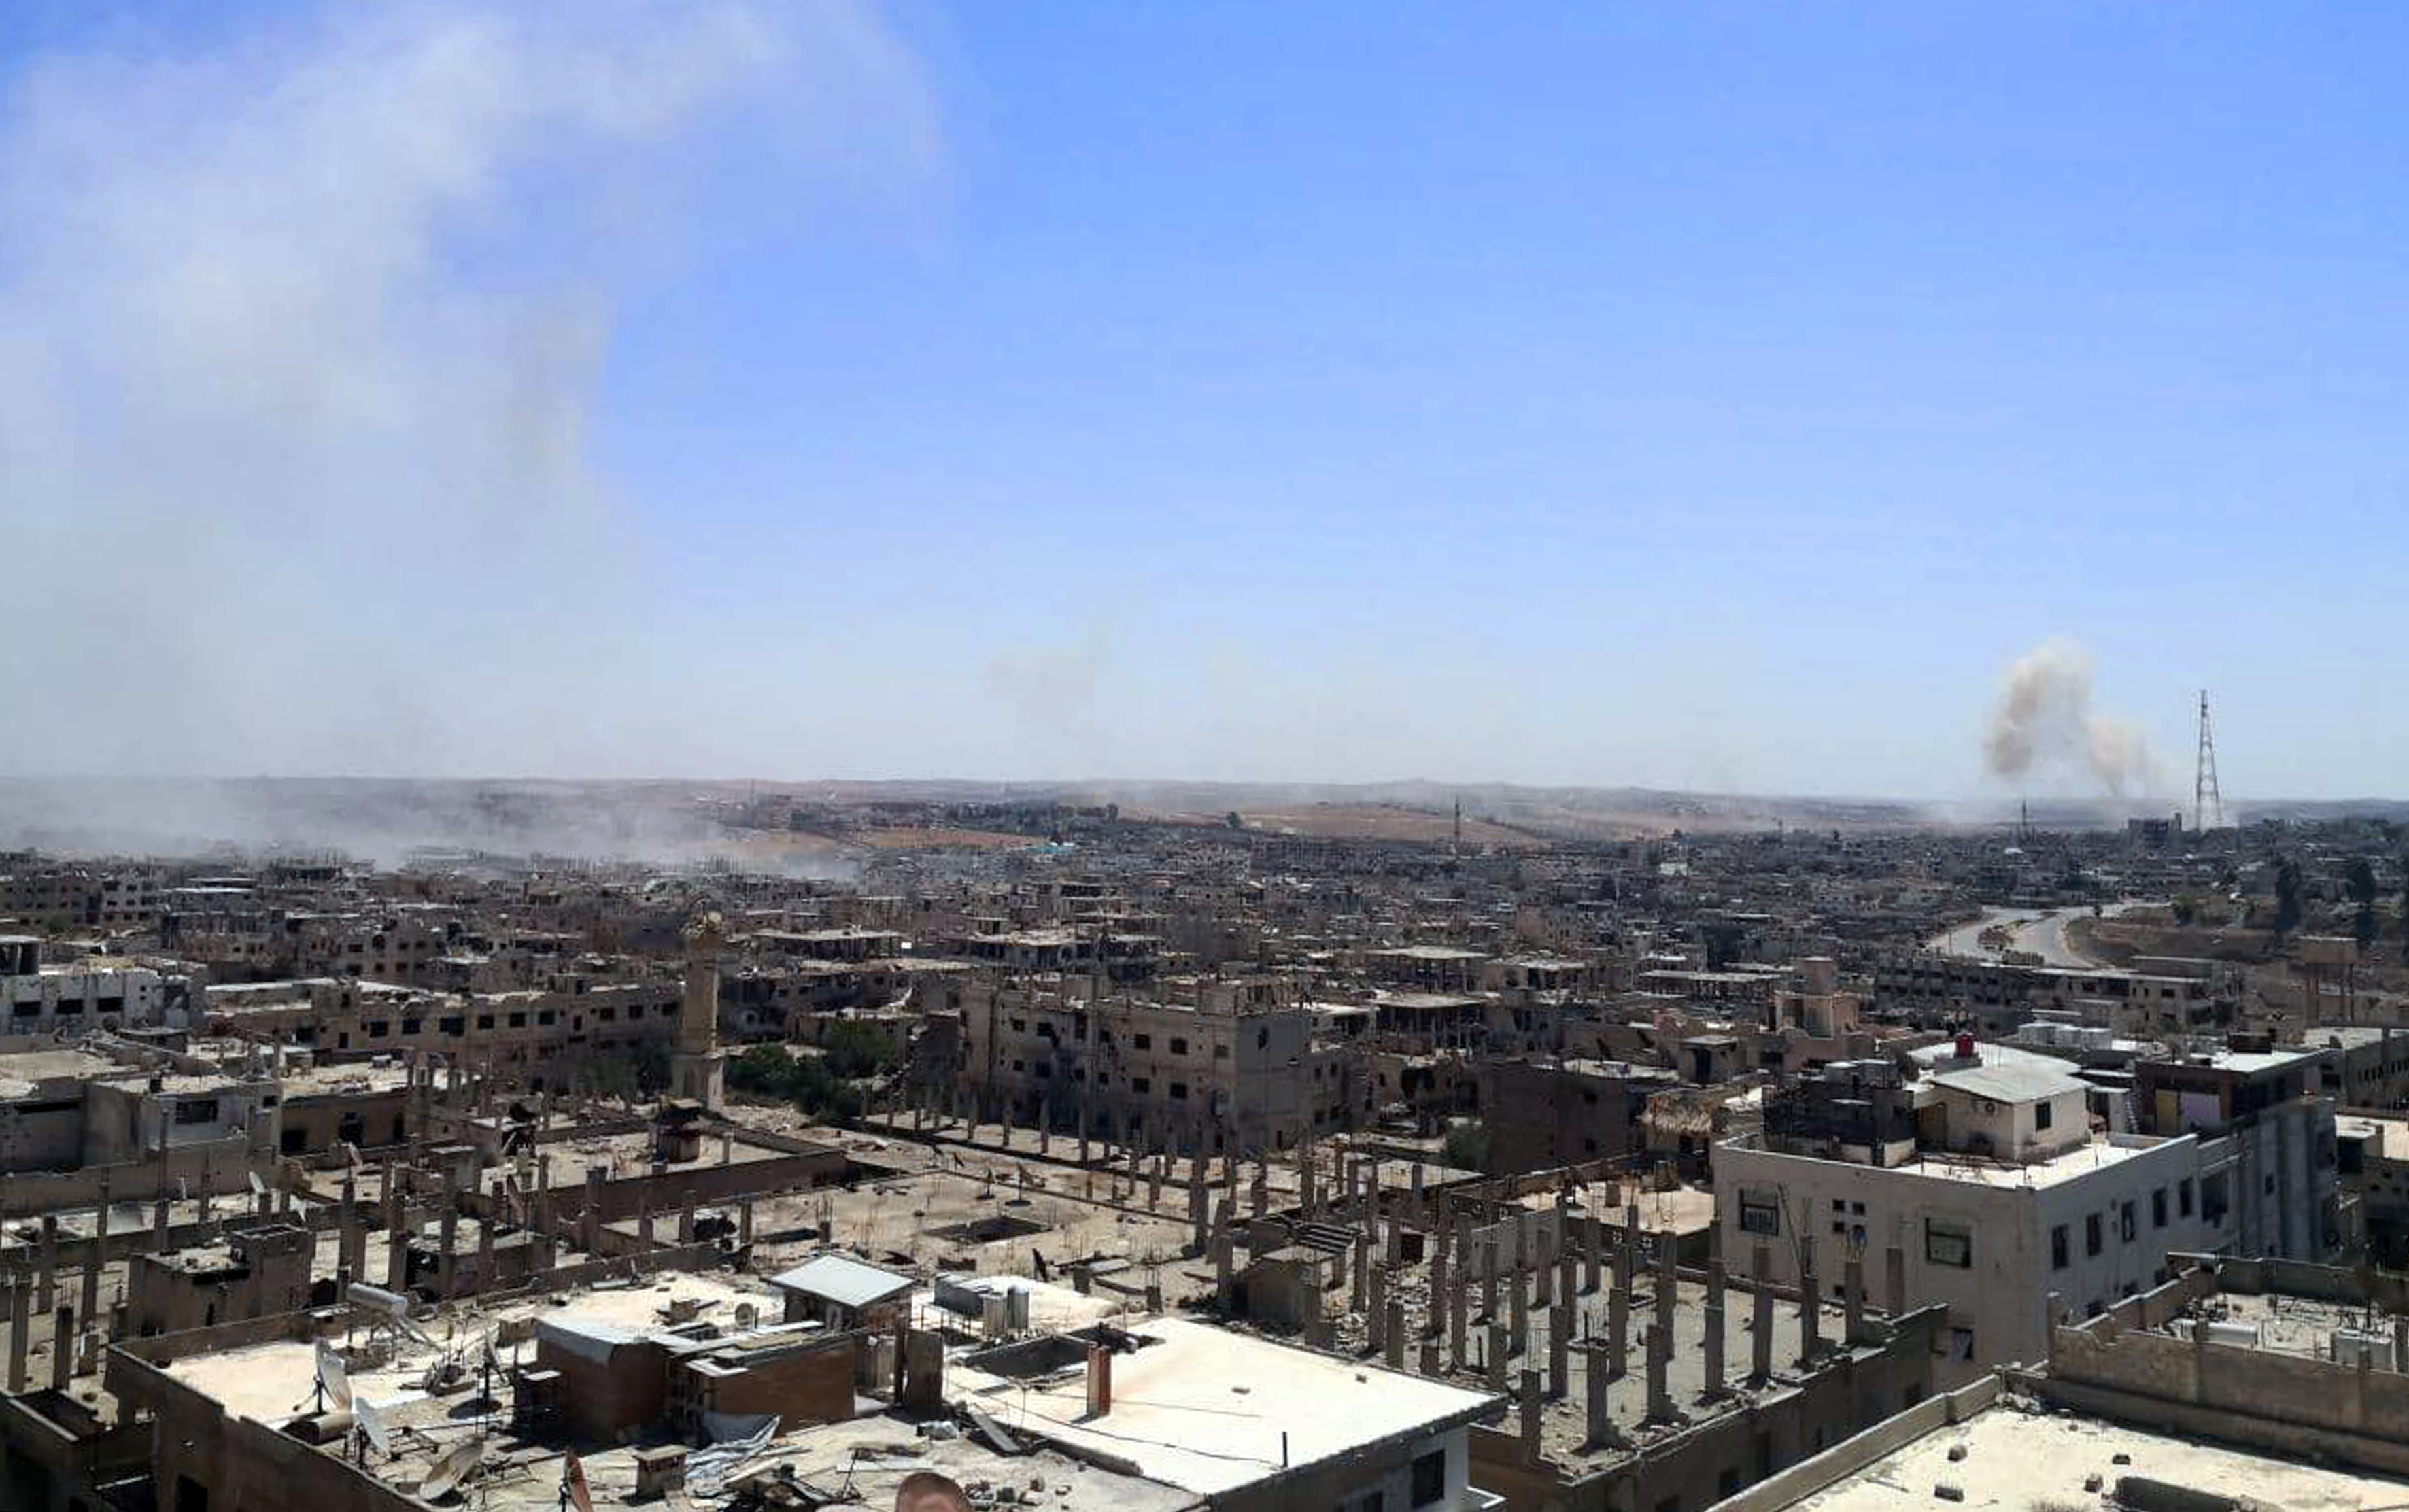 A view shows damaged buildings as smoke rises in Deraa